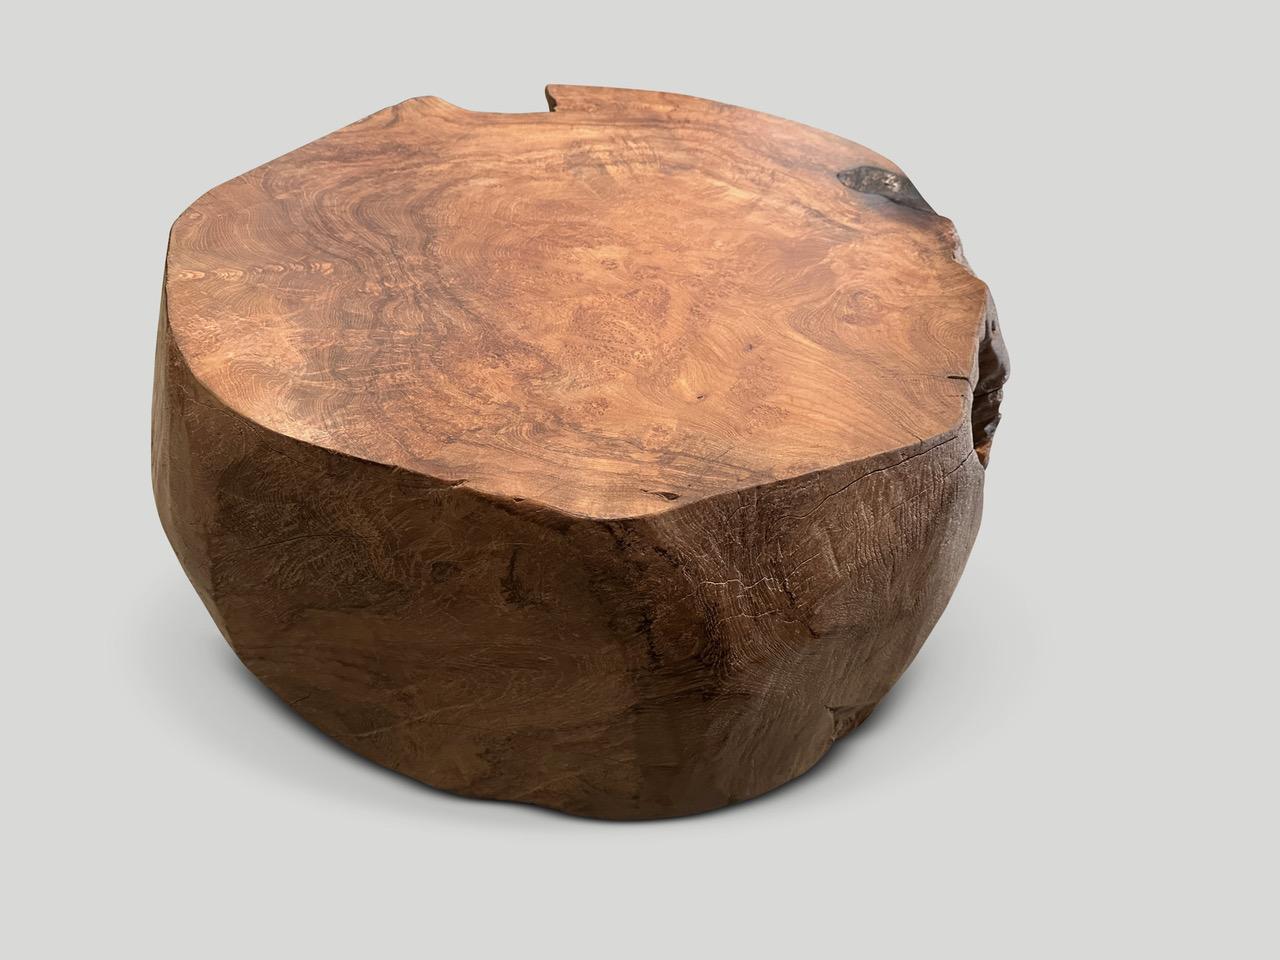 Impressive century year old burl wood coffee table. This wood is the hardest to source. We finished with a natural oil revealing the beautiful wood grain. It’s all in the details. 

Own an Andrianna Shamaris original

Andrianna Shamaris. The Leader